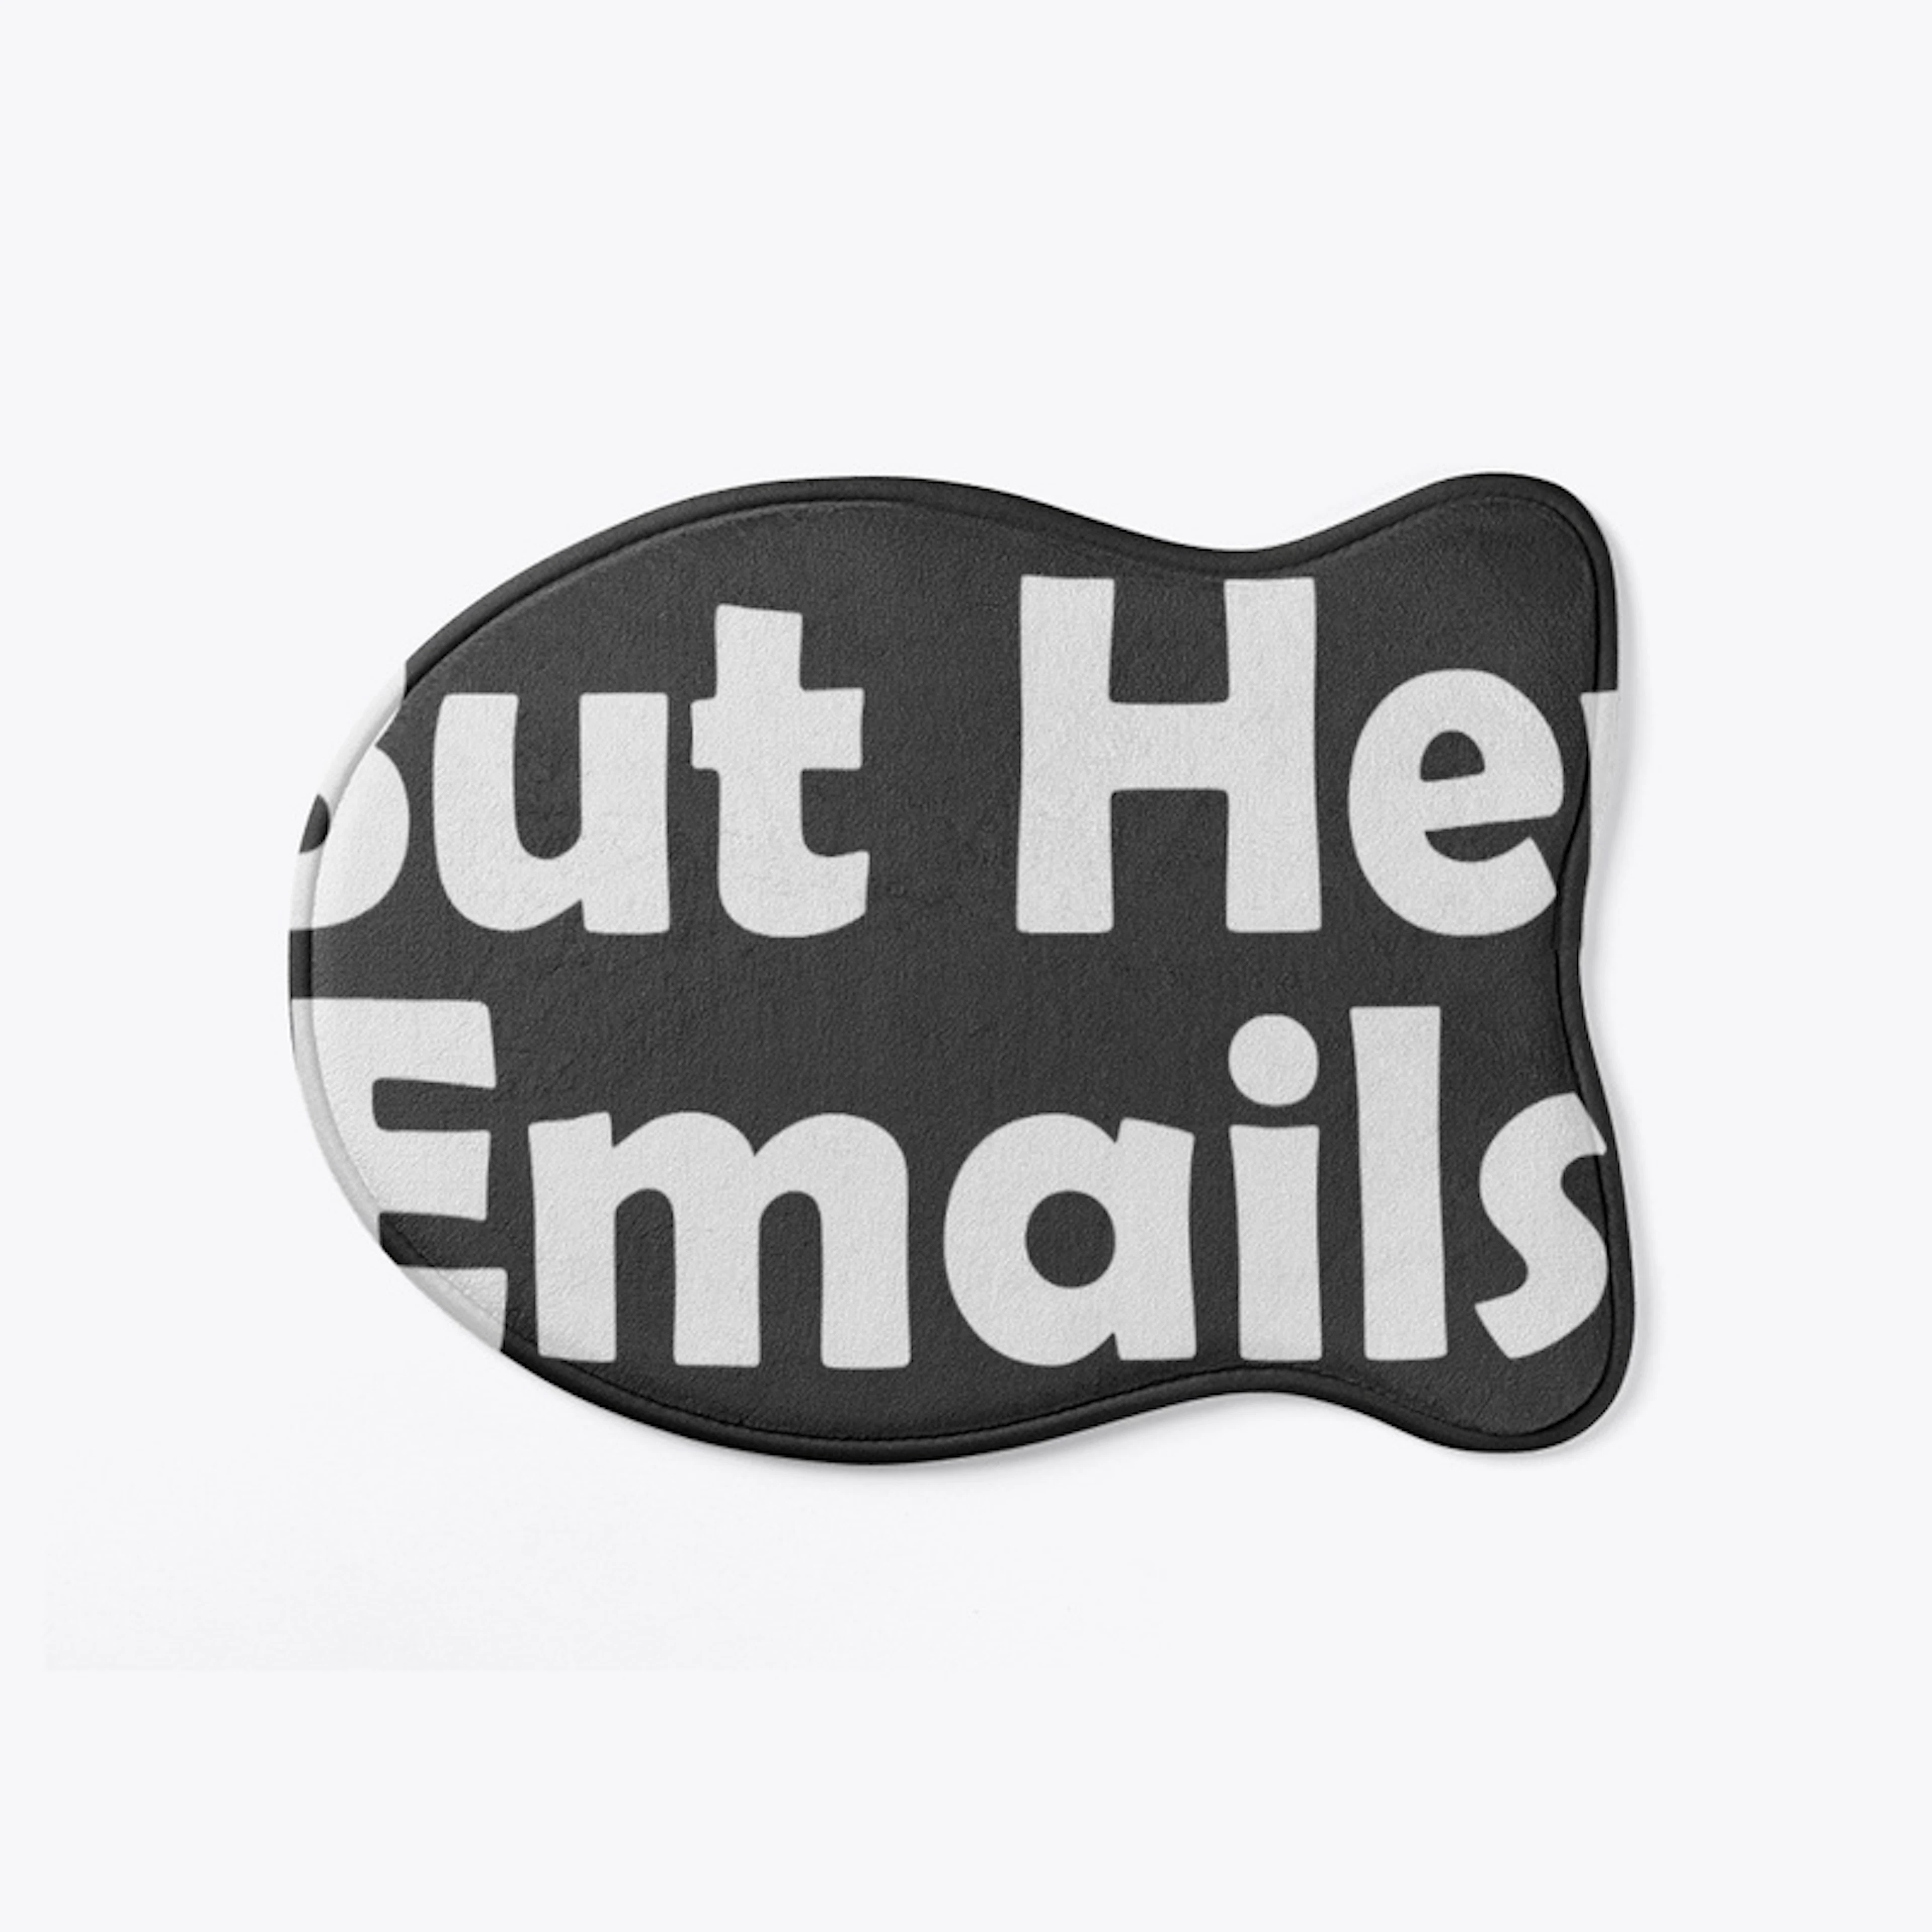 But Her Emails Merch Logo